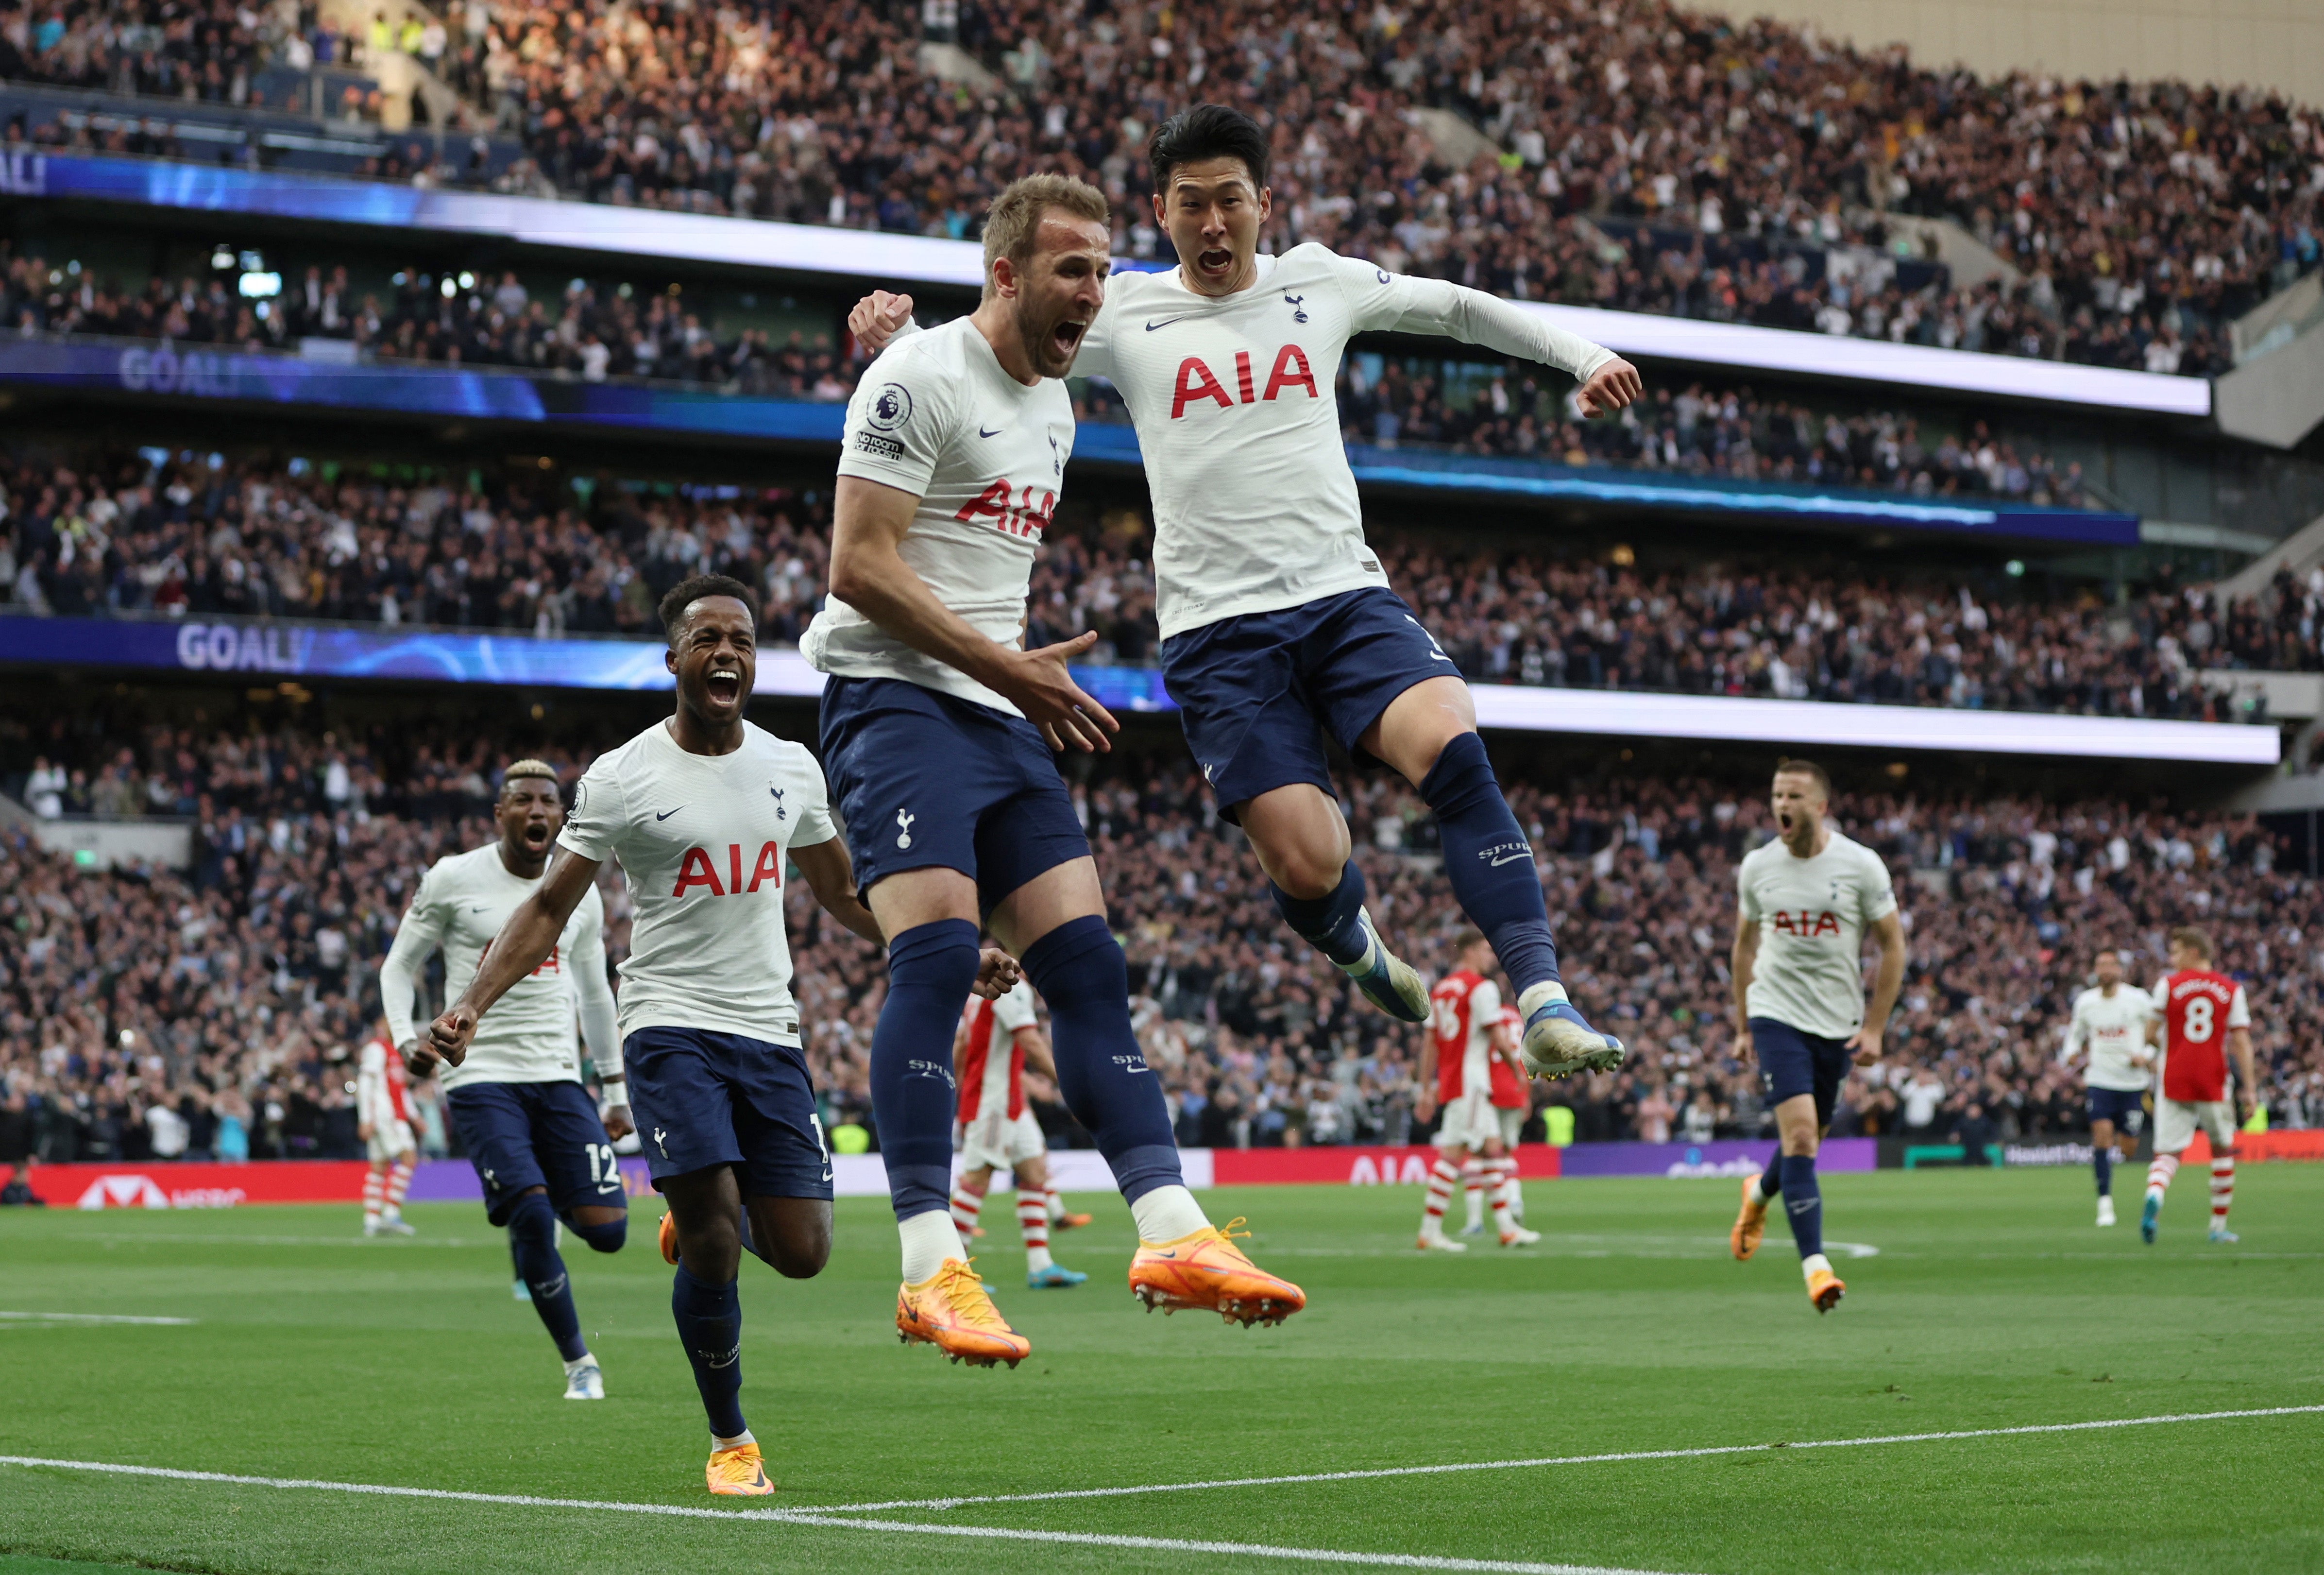 Tottenham vs Arsenal LIVE: Premier League result, final score and reaction as Harry Kane scores twice, Son Heung-min nets and Rob Holding sent off - The Independent